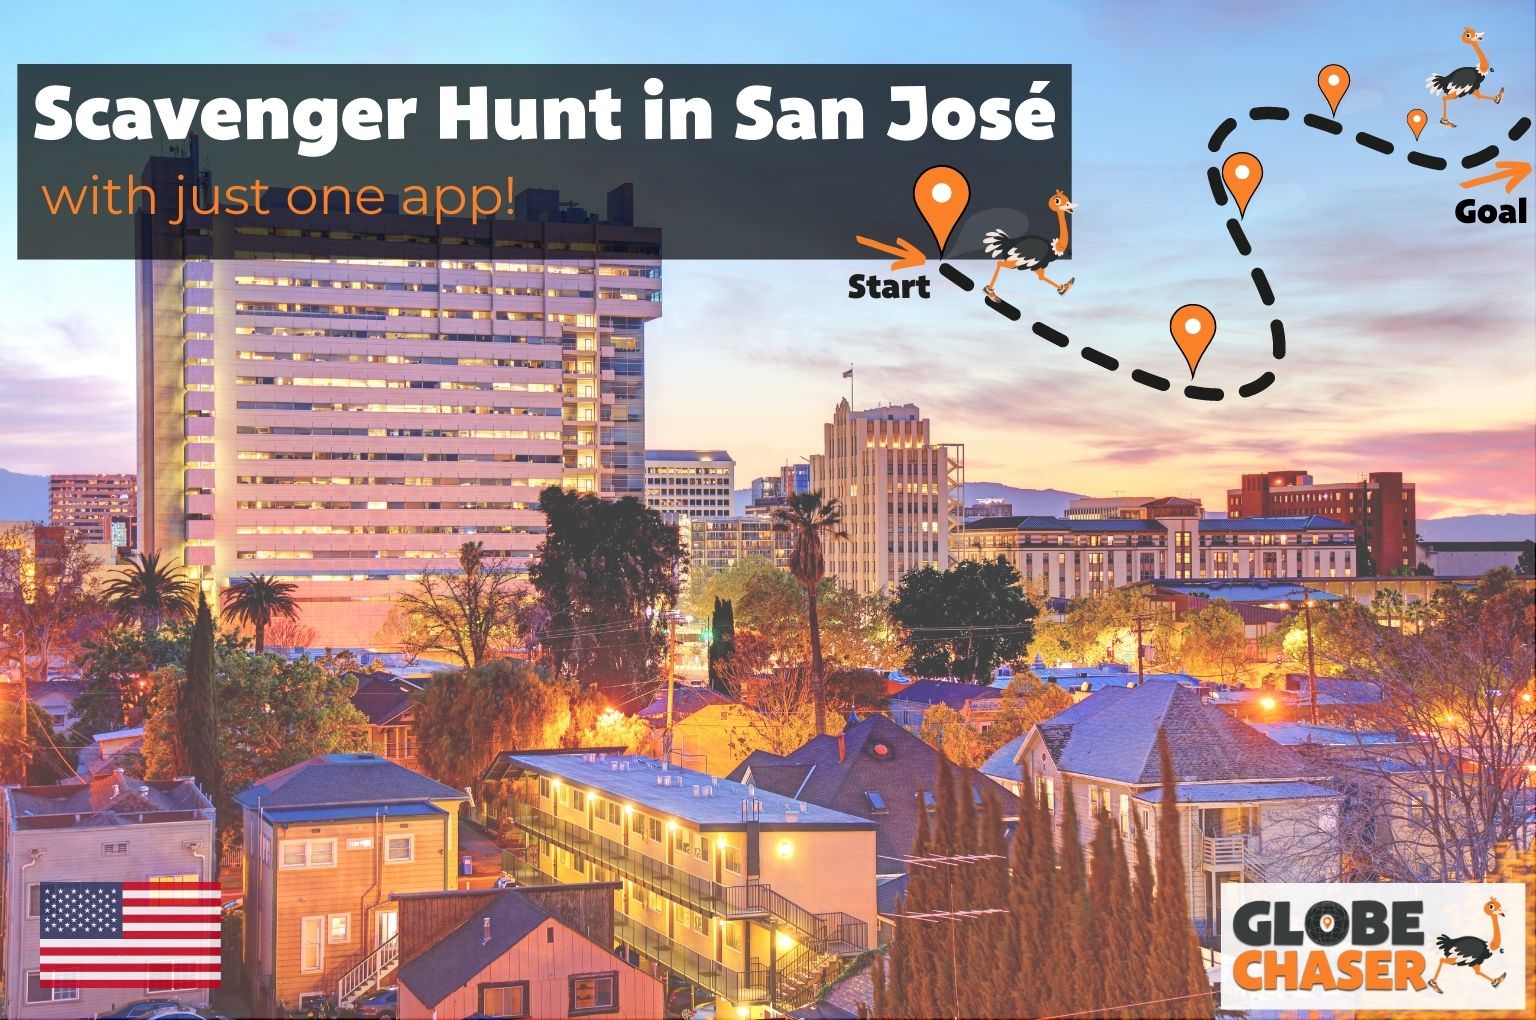 Scavenger Hunt in San Jose, USA - Family Activities with the Globe Chaser App for Outdoor Fun